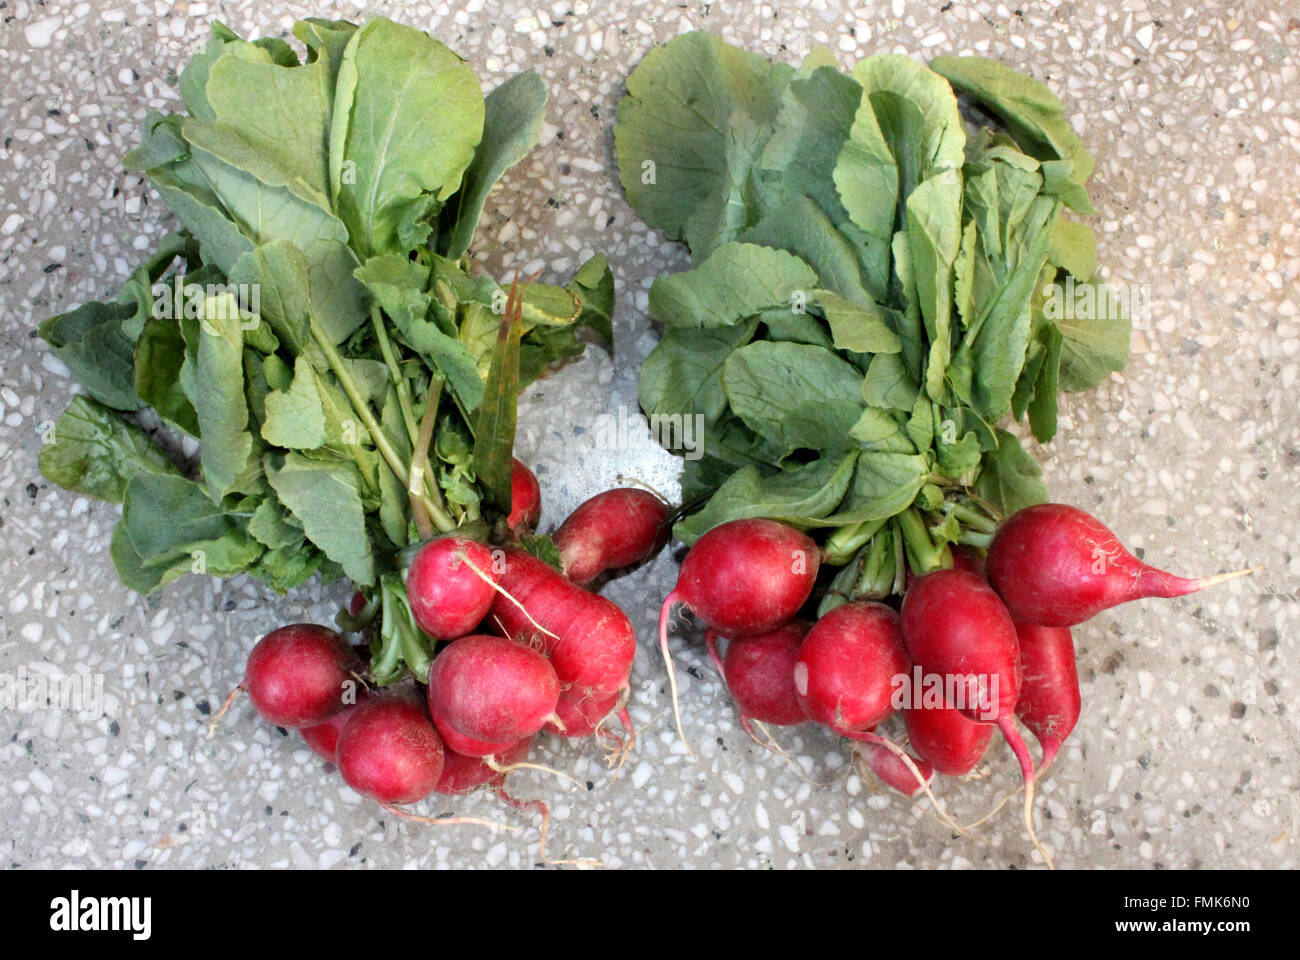 Red English Radish, Raphanus sativus, popular salad food crop with shorter leaves with few lobes, and small globose red roots Stock Photo